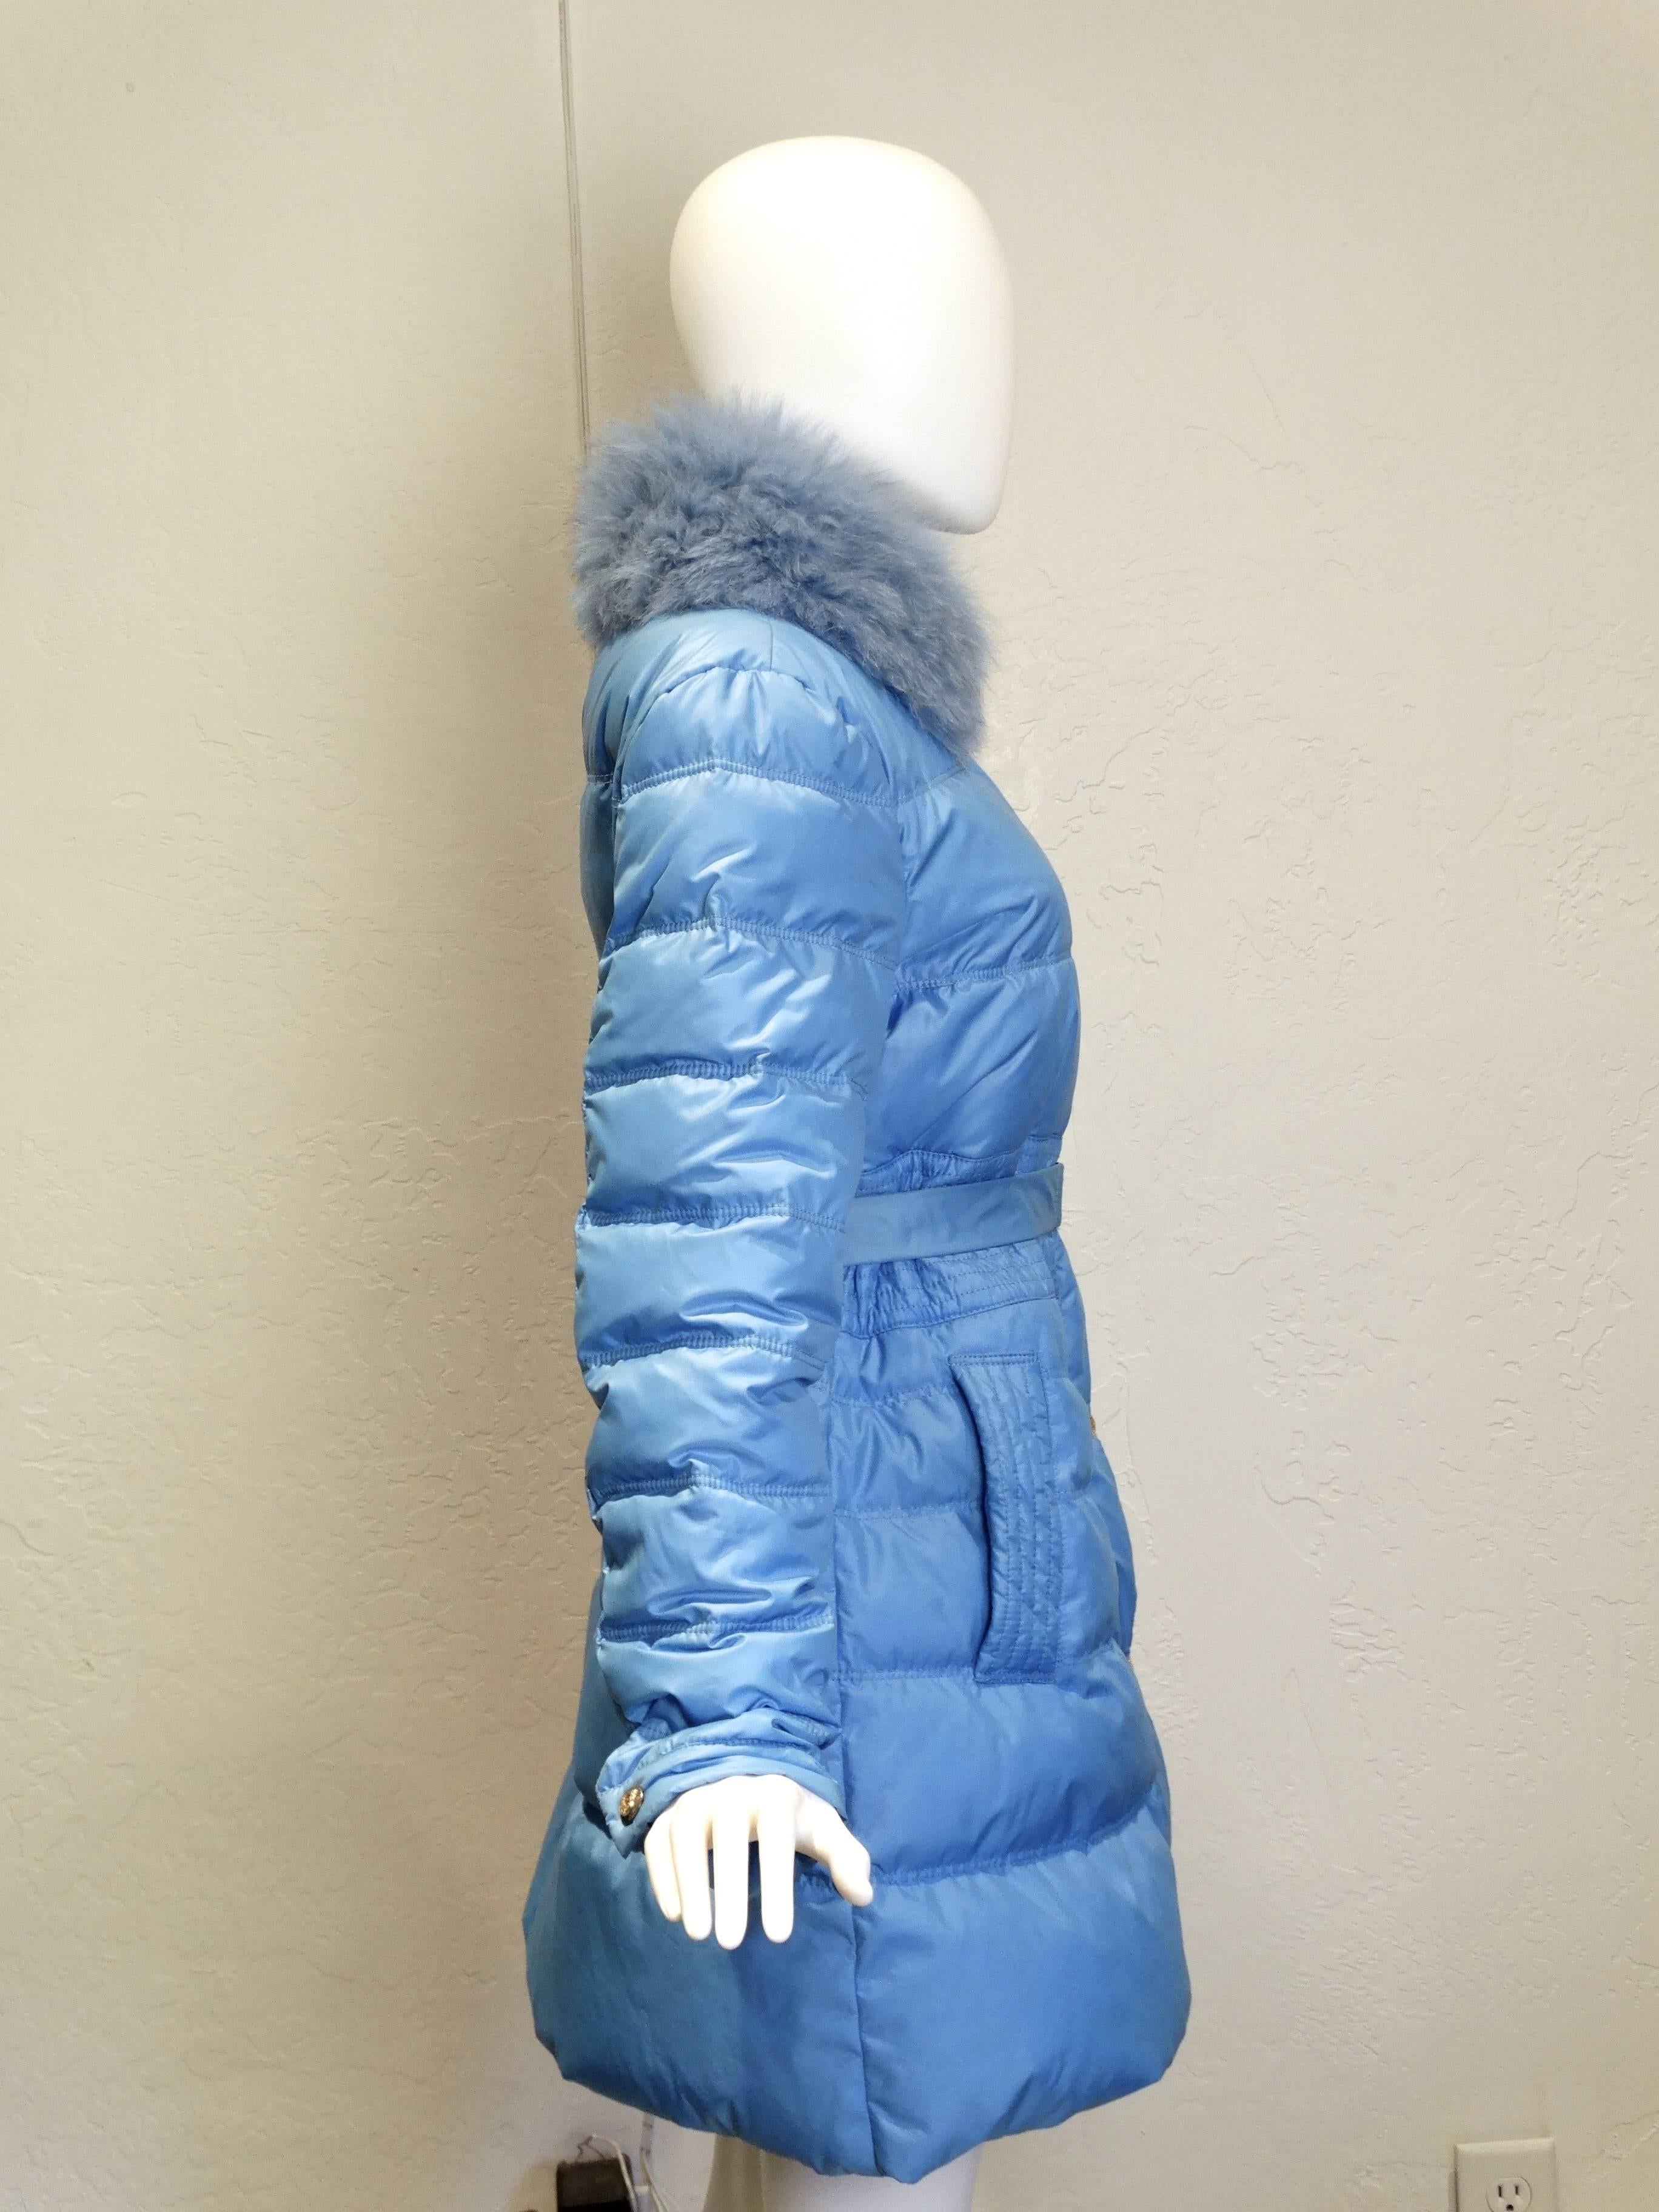 Capri Blue feather down belted padded jacket from Versace Collection Winter Coat circa 2013 featuring a funnel neck with a blue mink fur trim (which is detachable) a front zipper fastening with a hidden zipper. Large half medusa head button snaps go